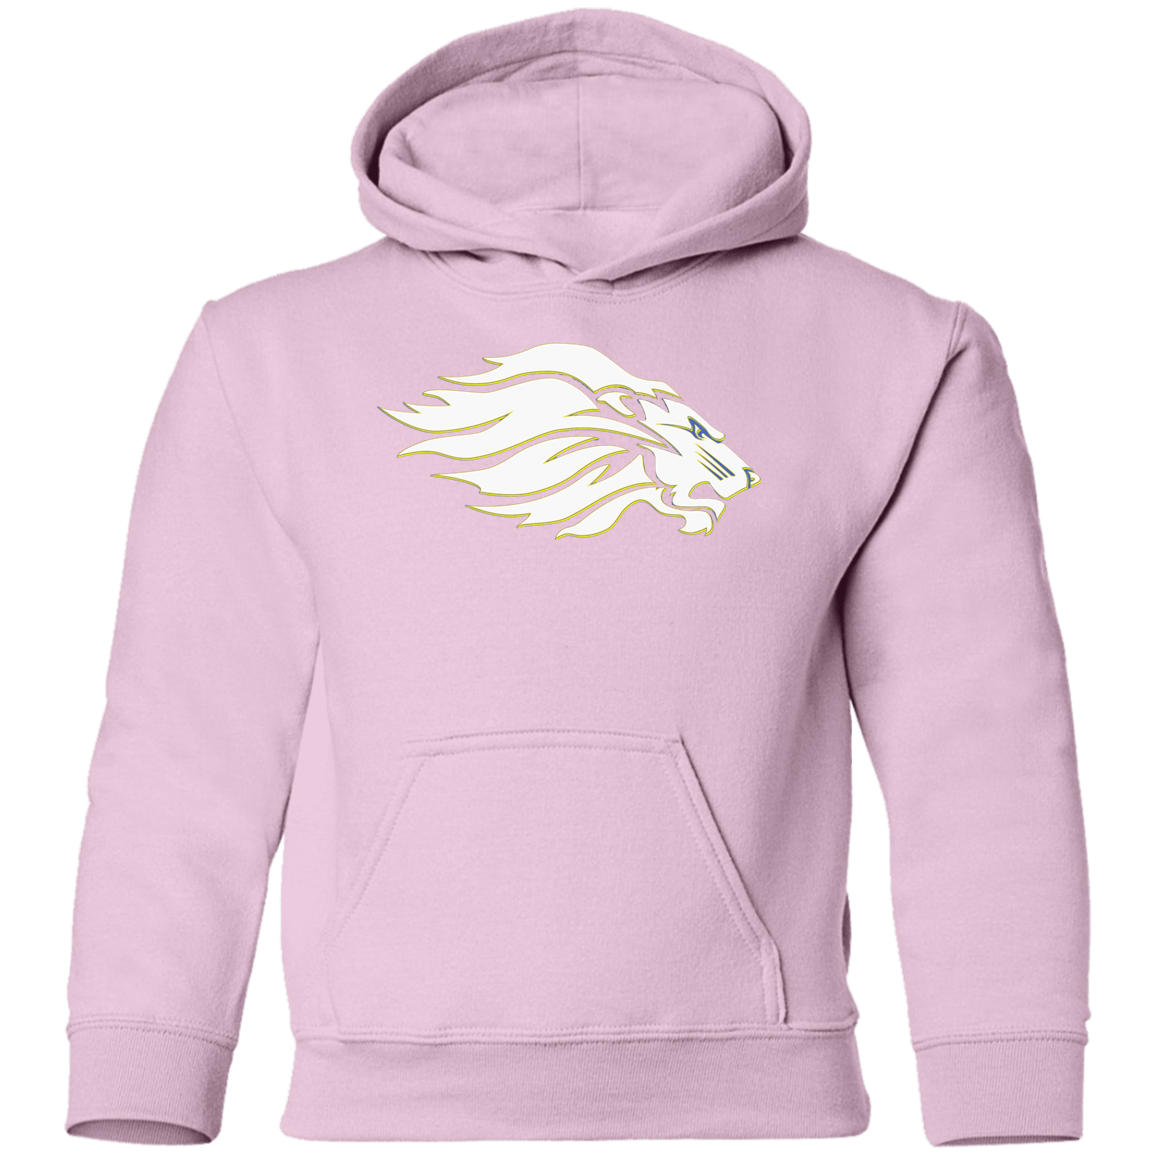 CCCS Lions Youth Pullover Hoodie